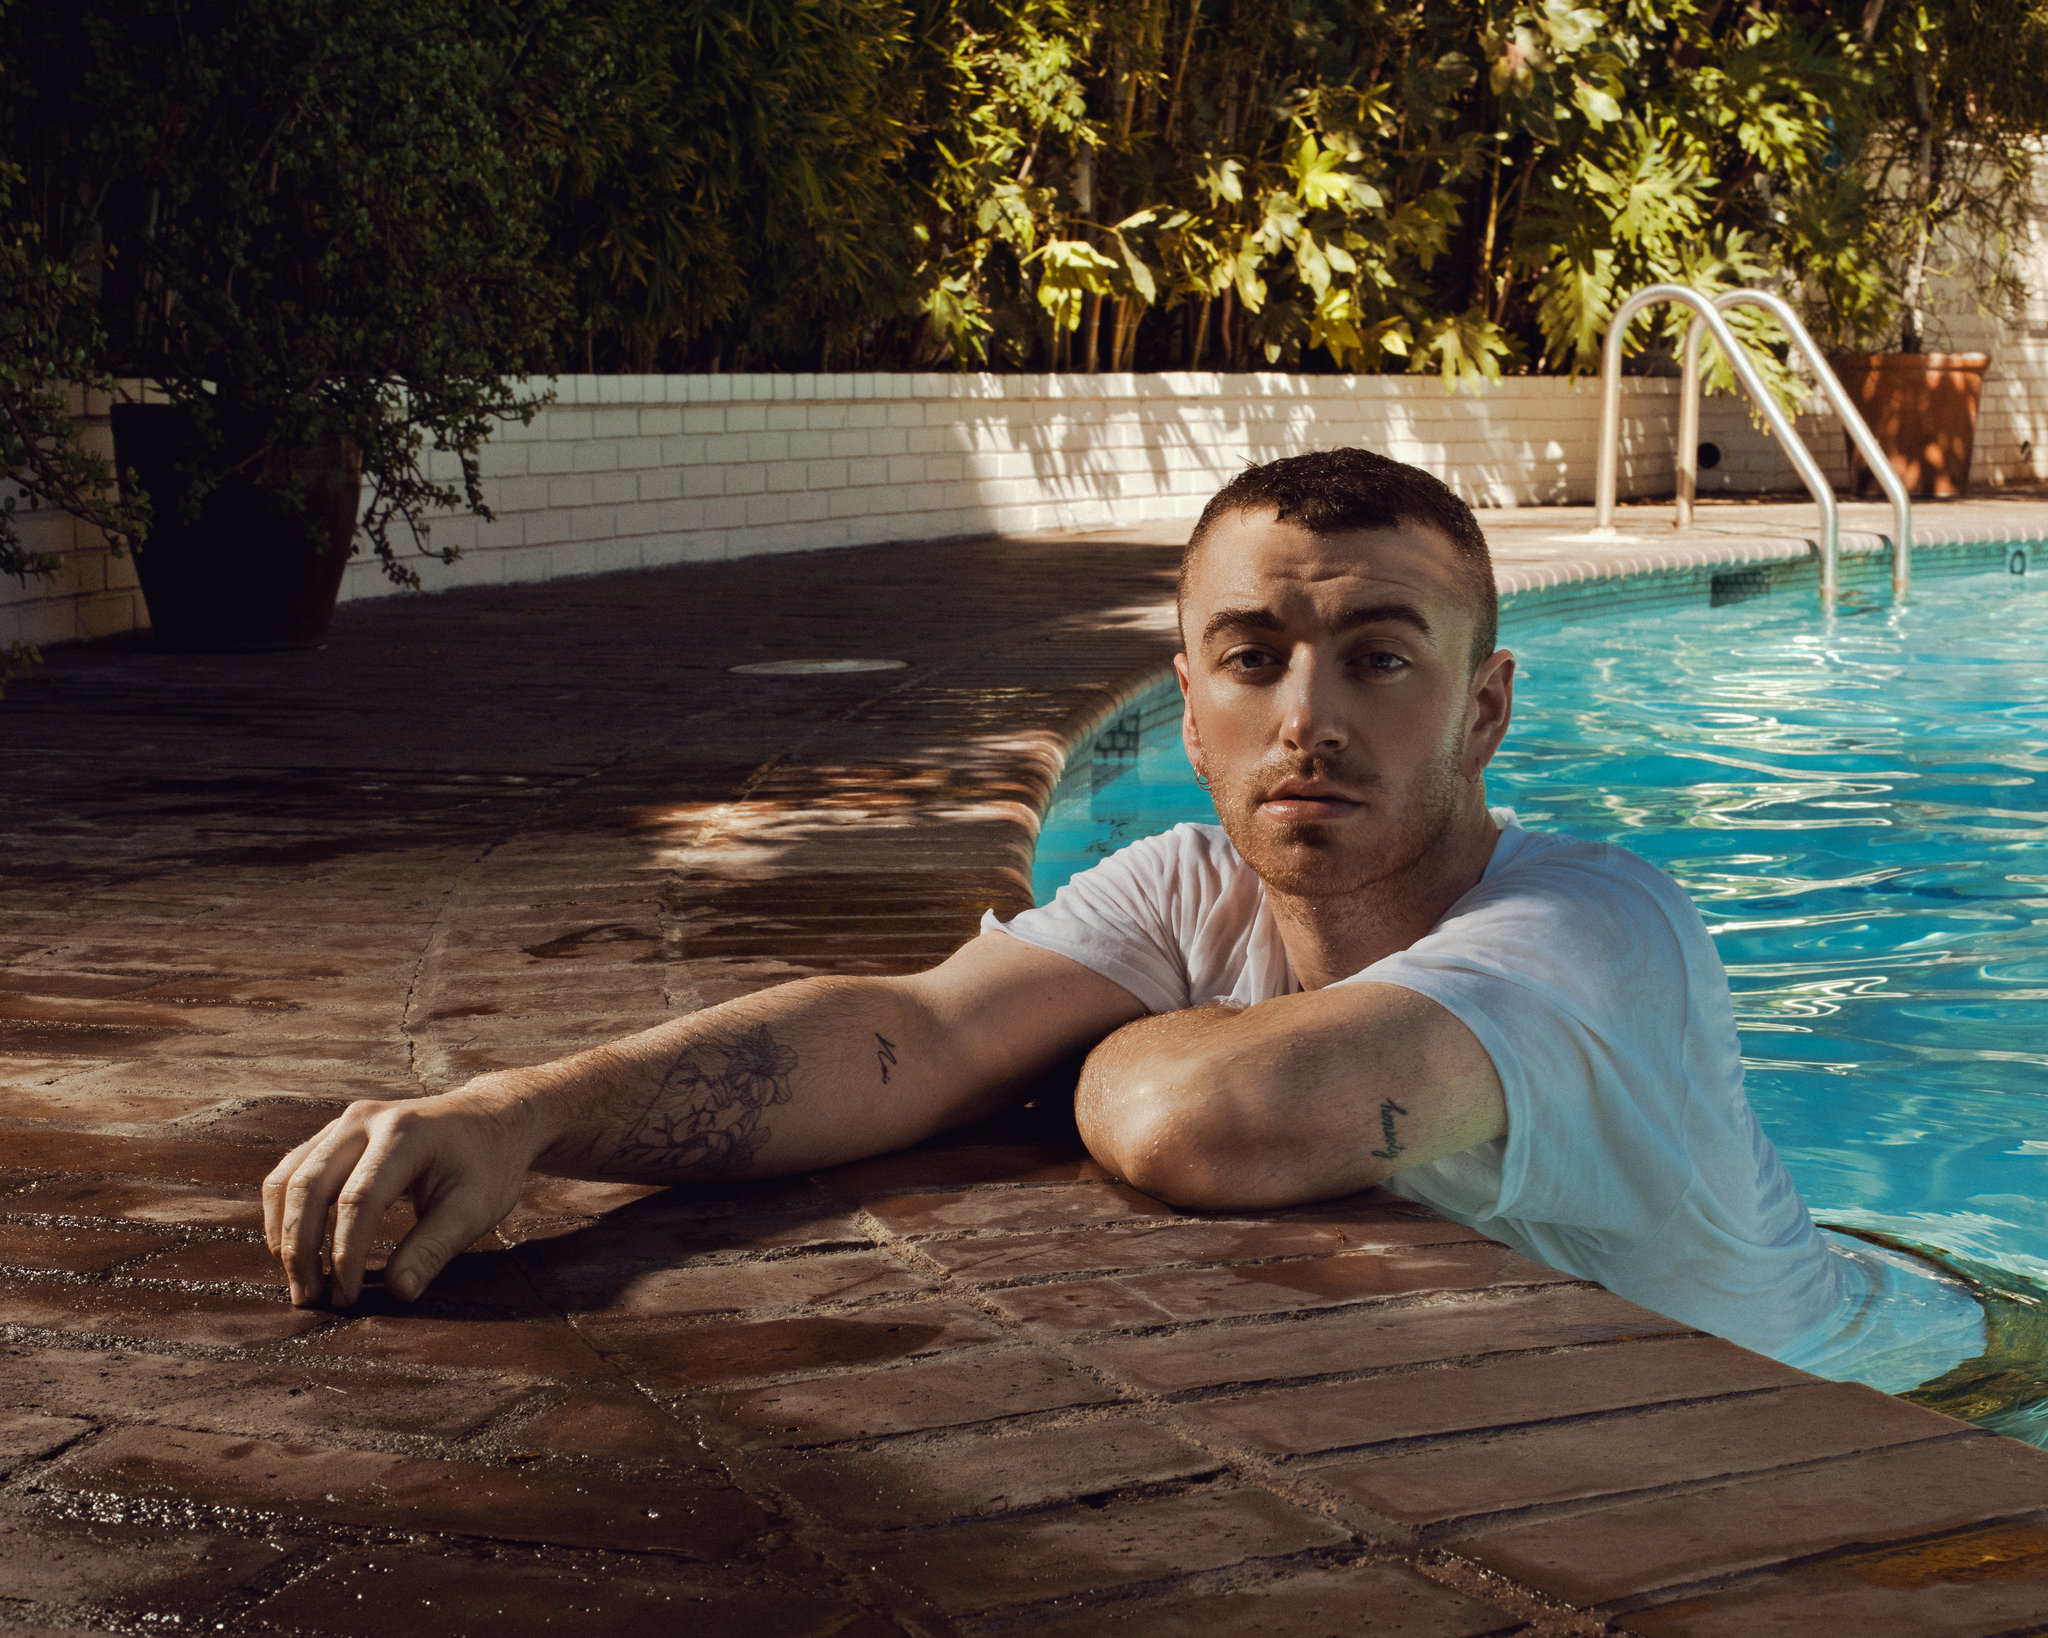 Sam Smith wearing a white shirt on a poool